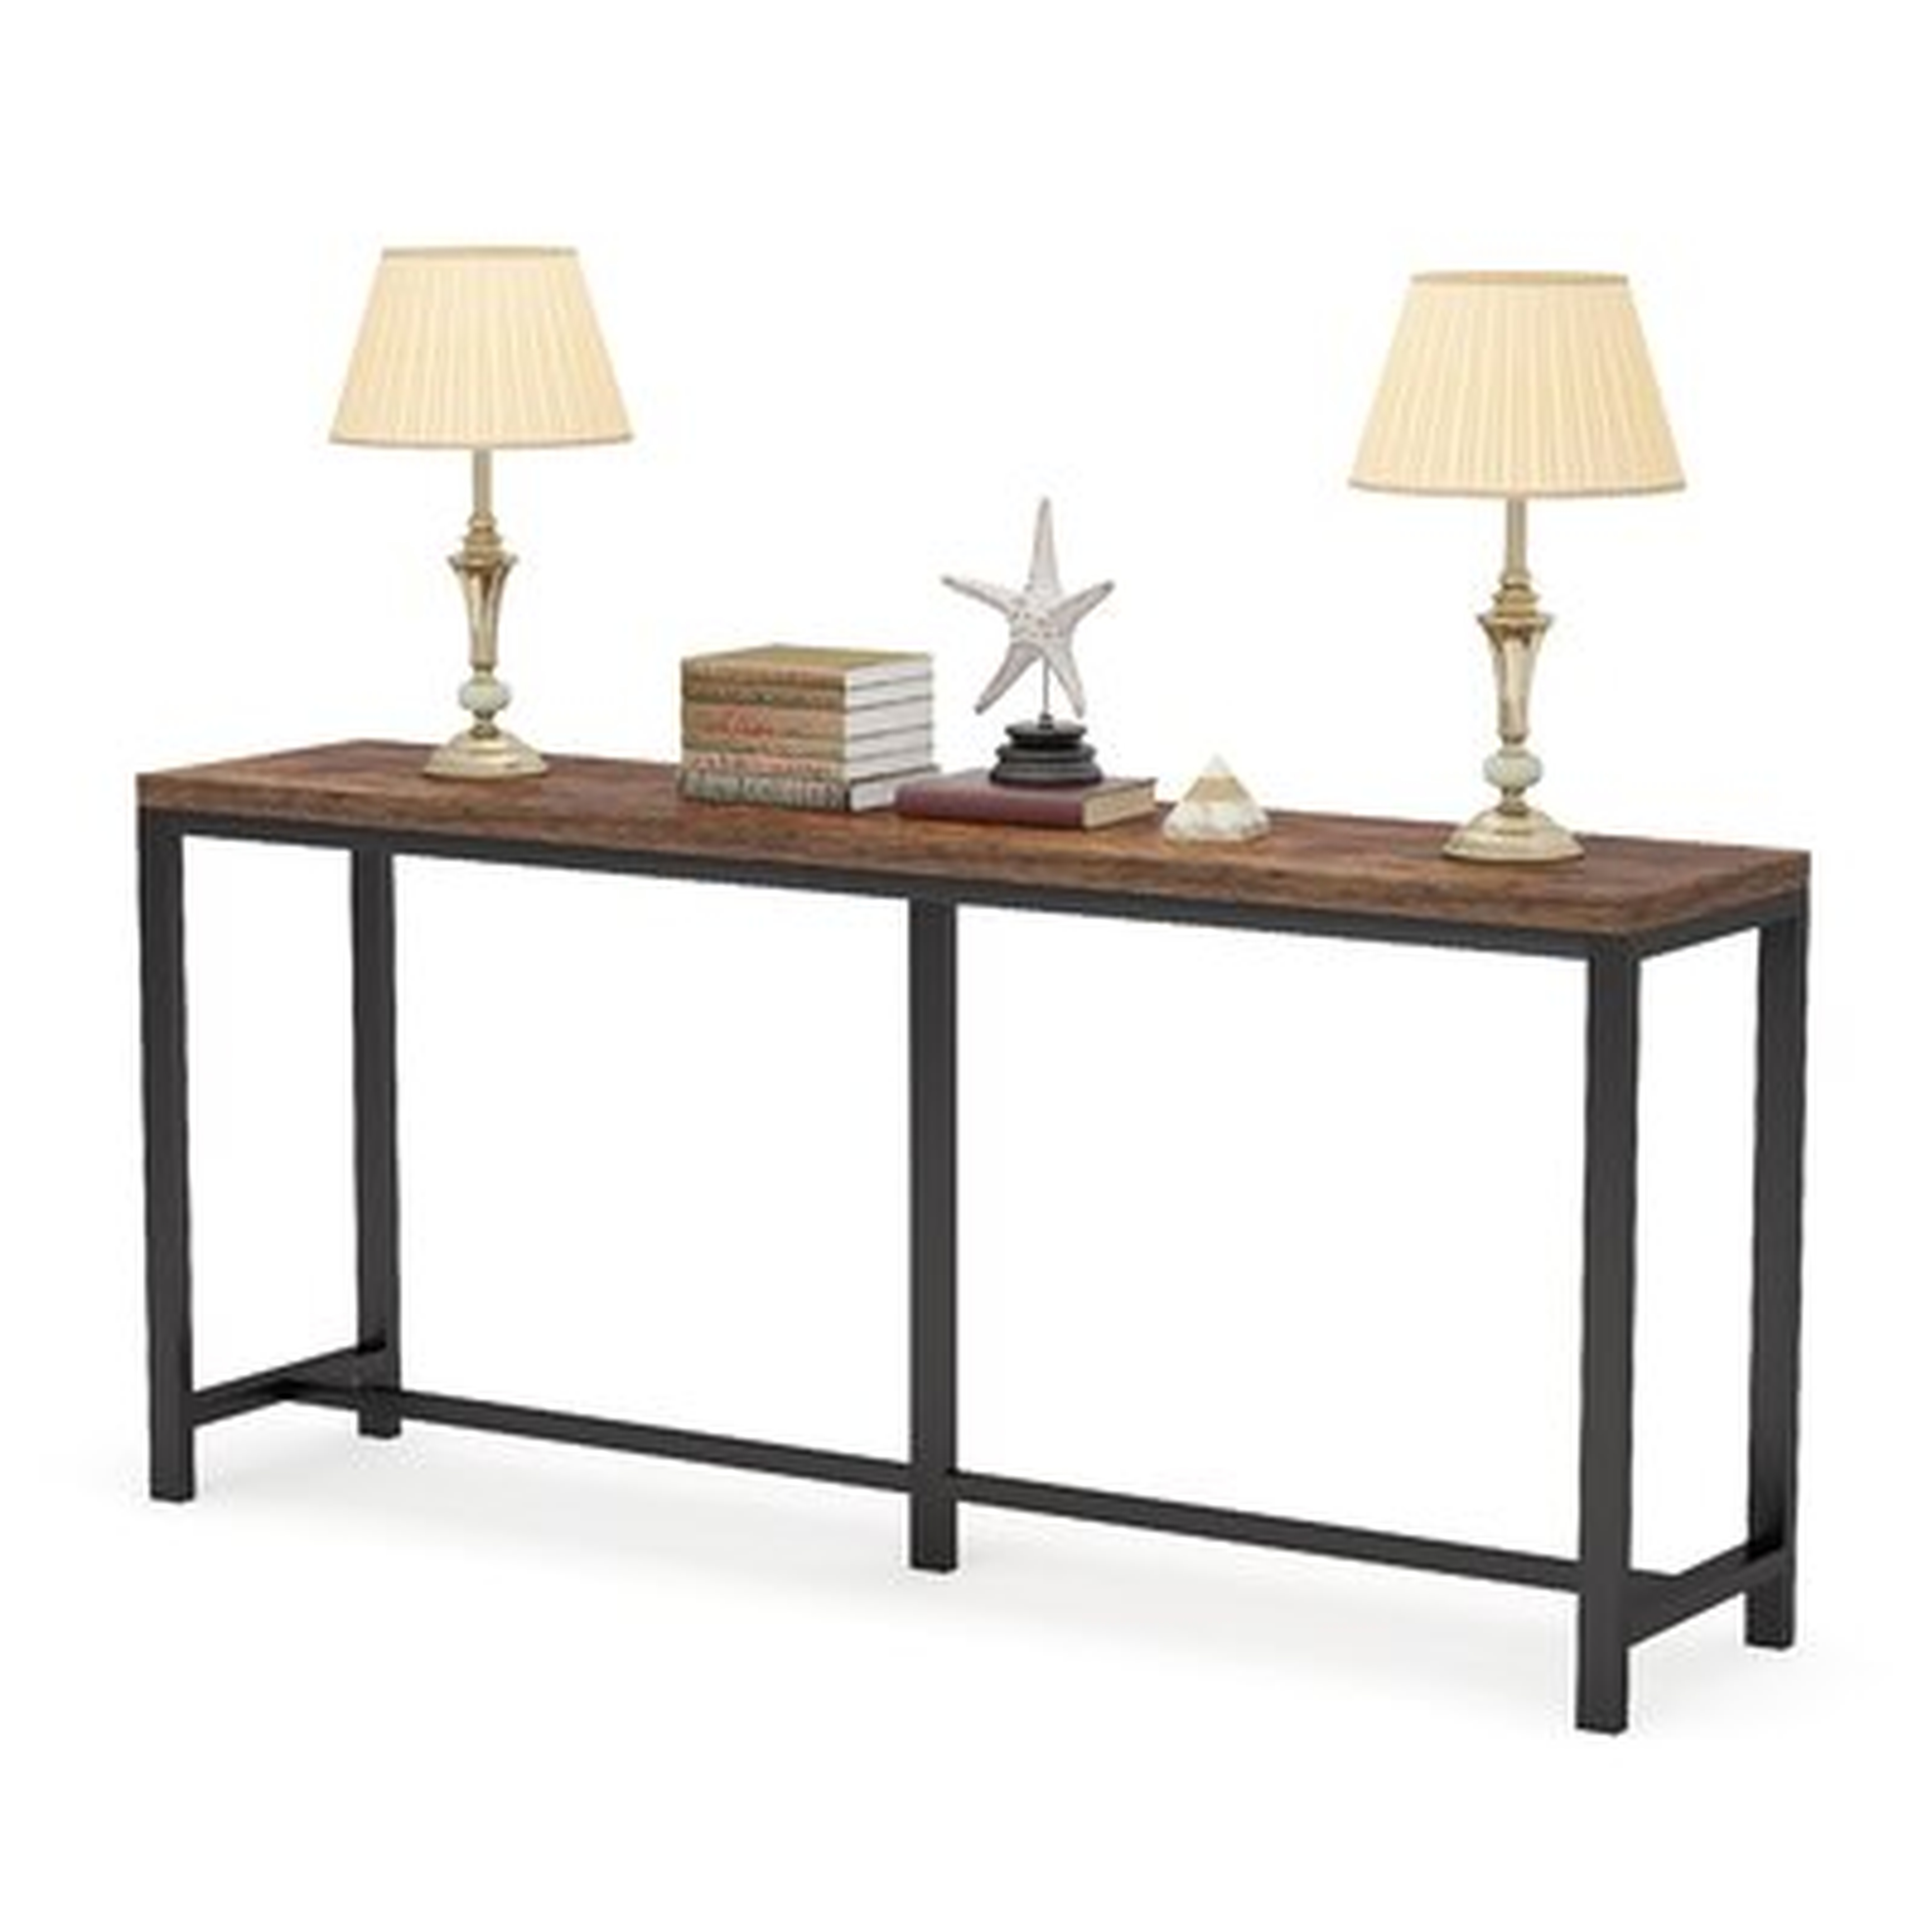 70.9 Inch Extra Long Sofa Table, Console Table Behind Sofa Couch, Narrow Long Entryway Table - Wayfair